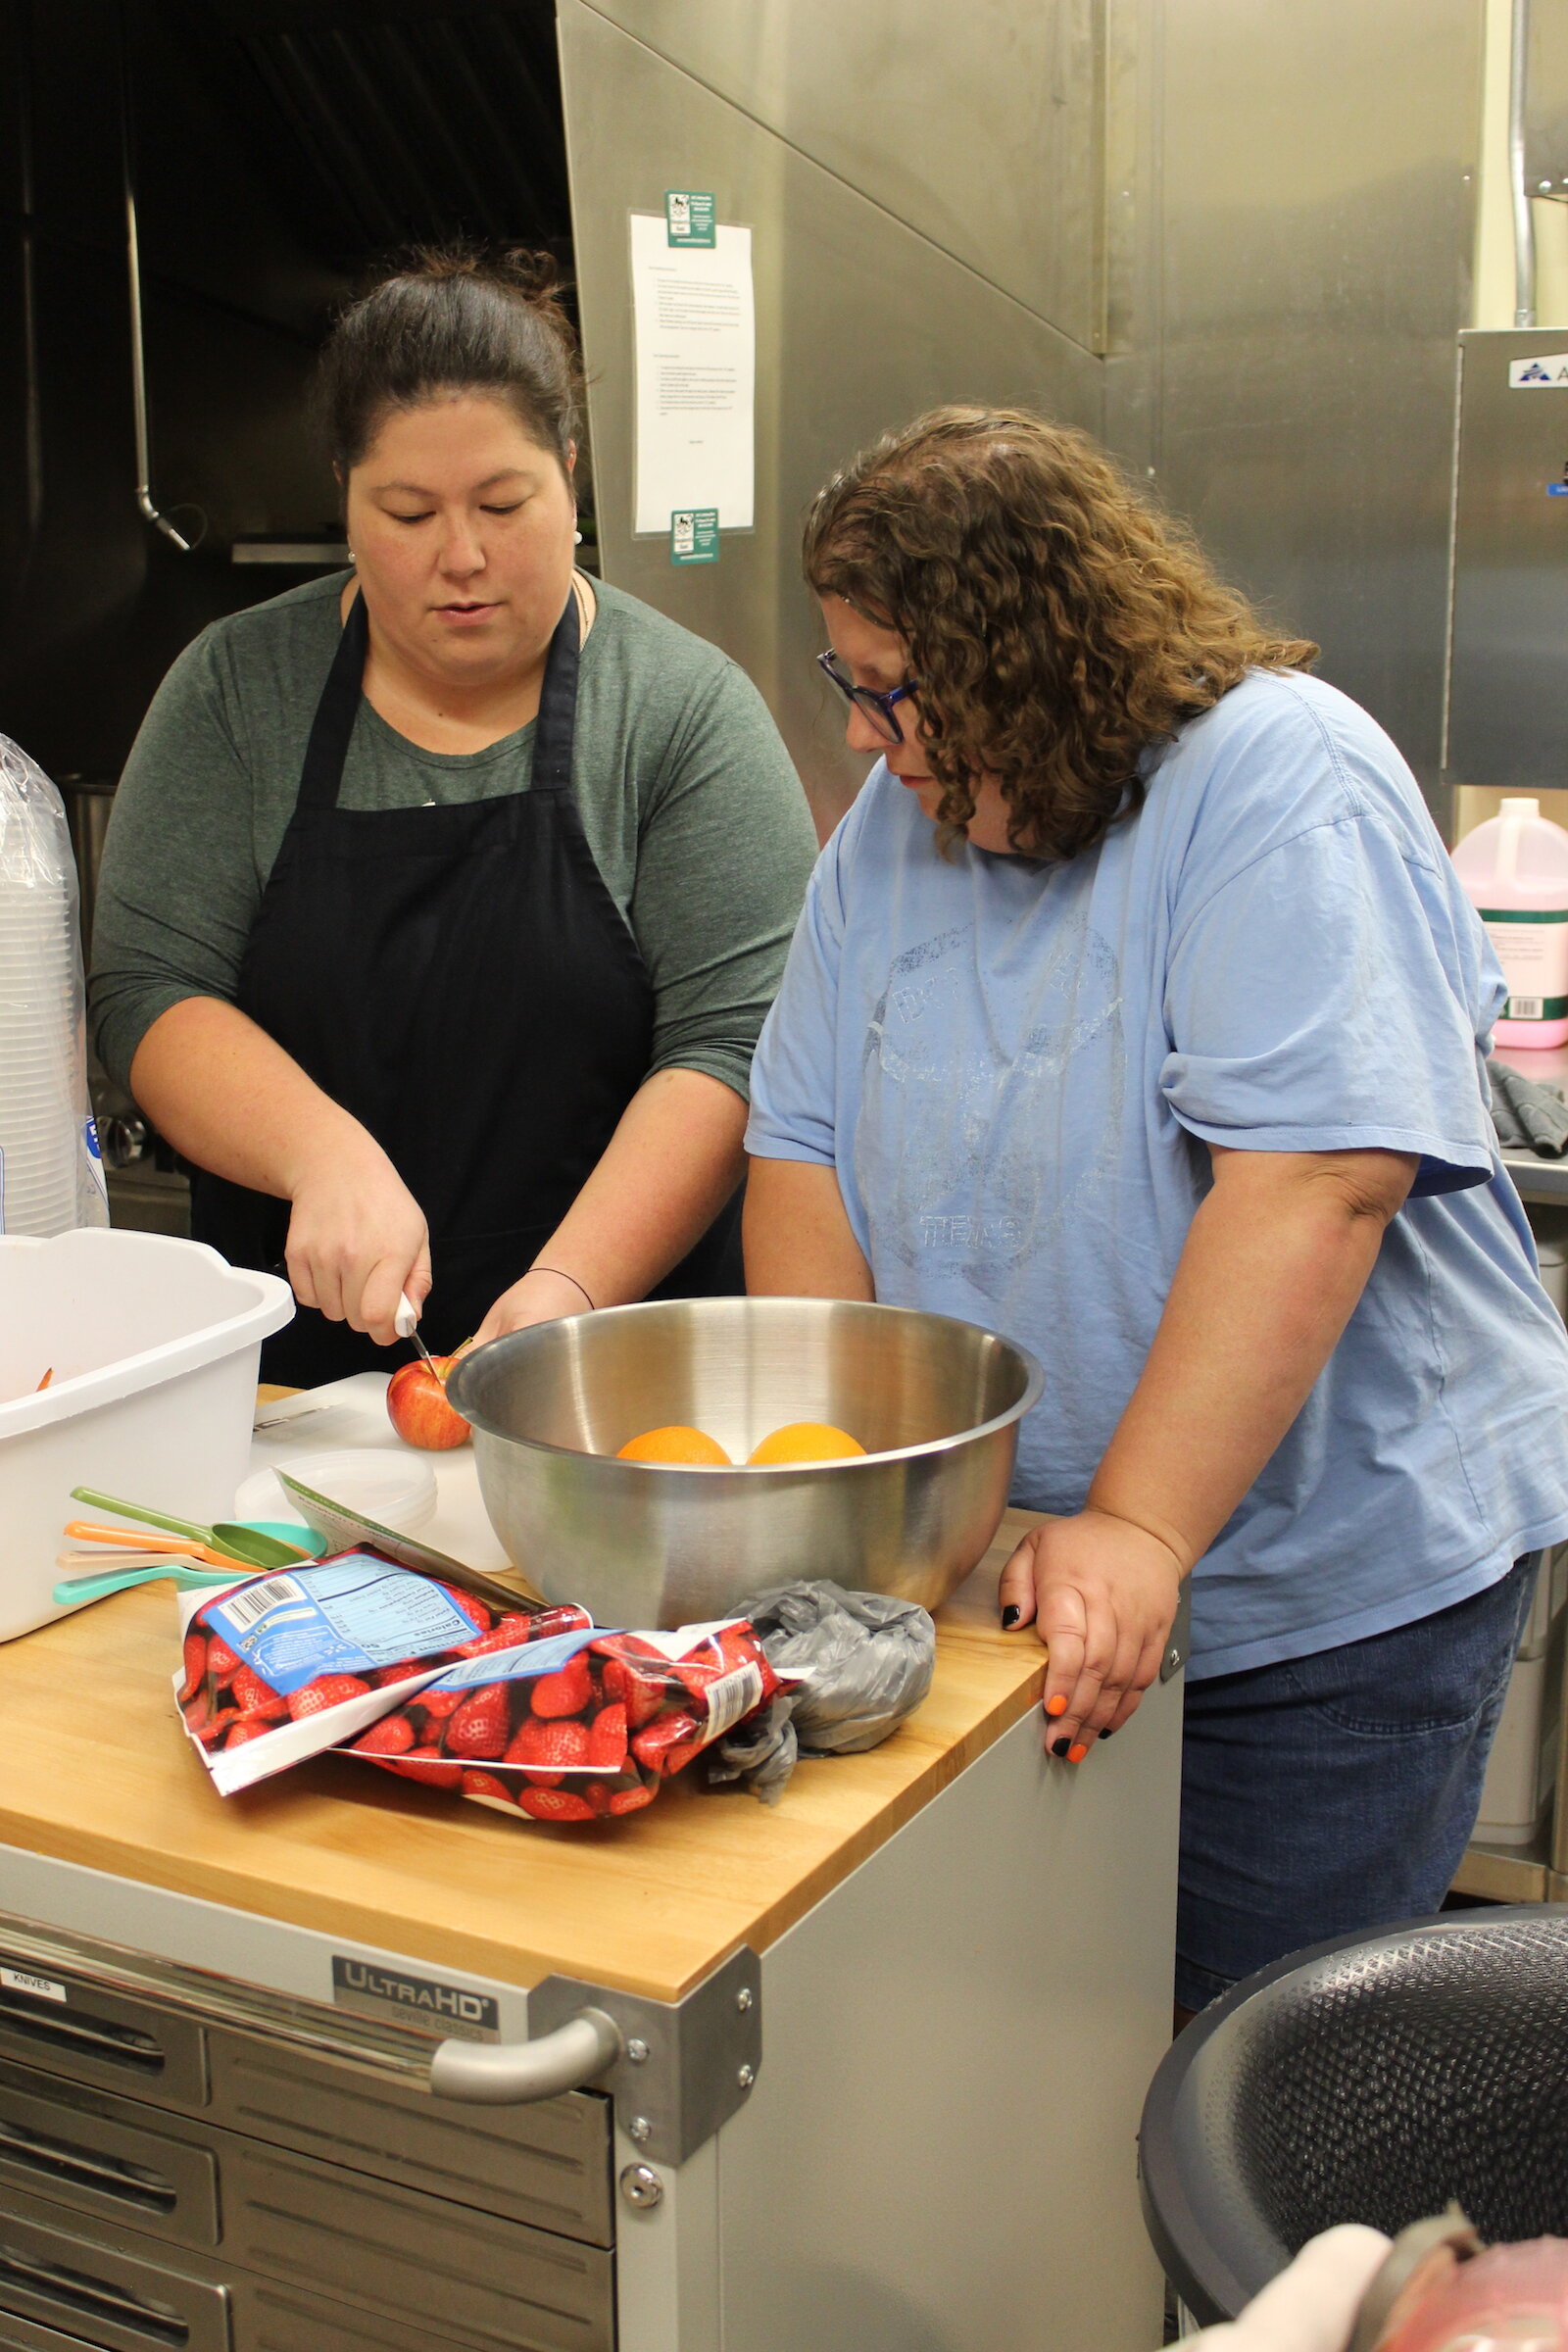 Kim Trombley works with class participant Kalisha Doty as they cut apples ahead of the Our HEALing Kitchen class at Shepherd’s Hand.